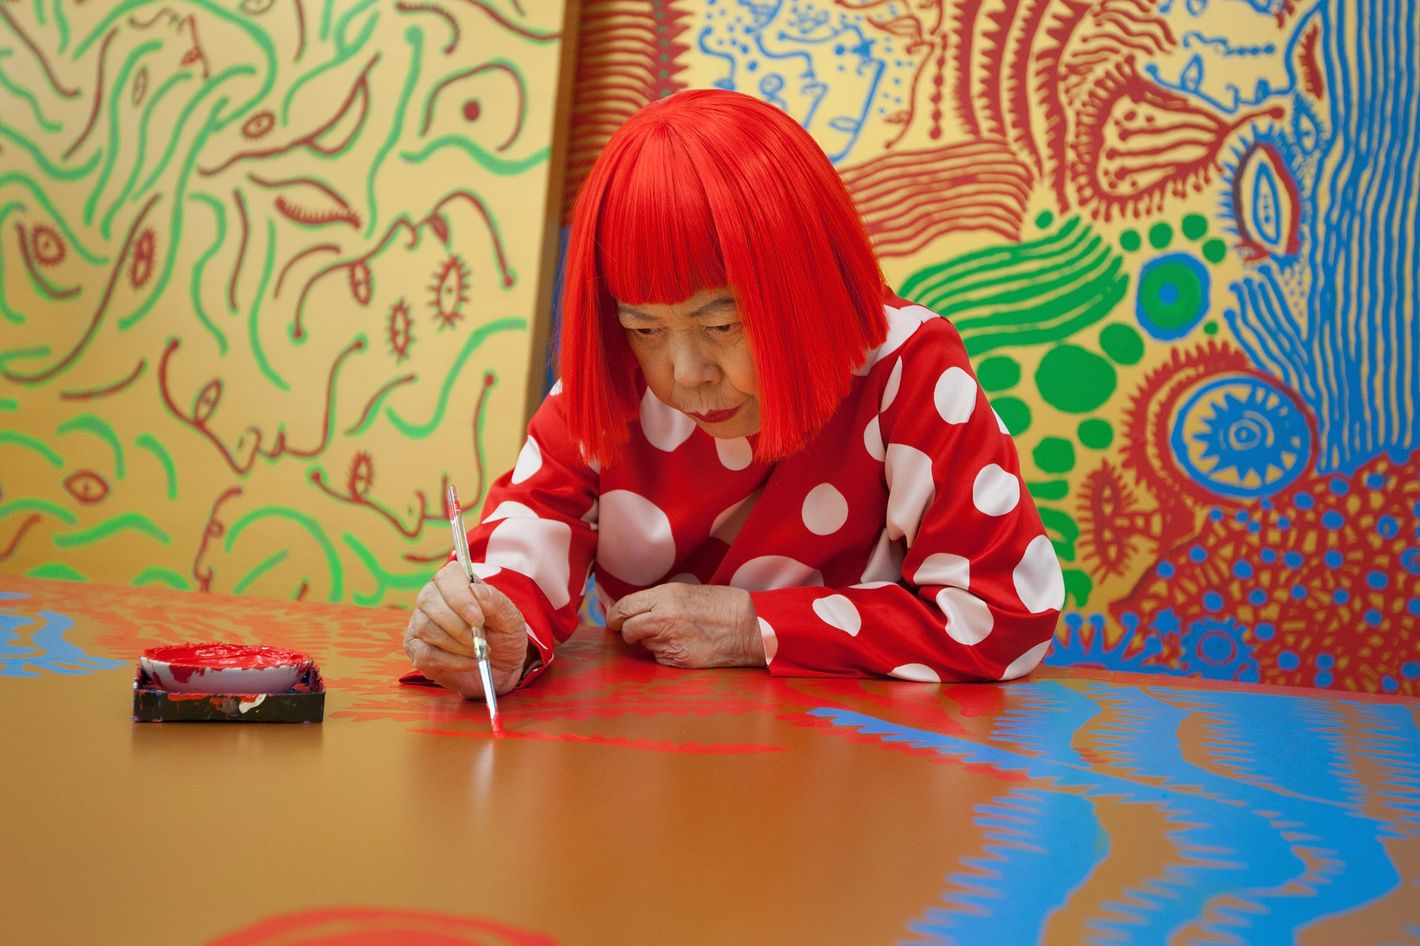 Louis Vuitton Announces Another Collaboration With Artist Yayoi Kusama